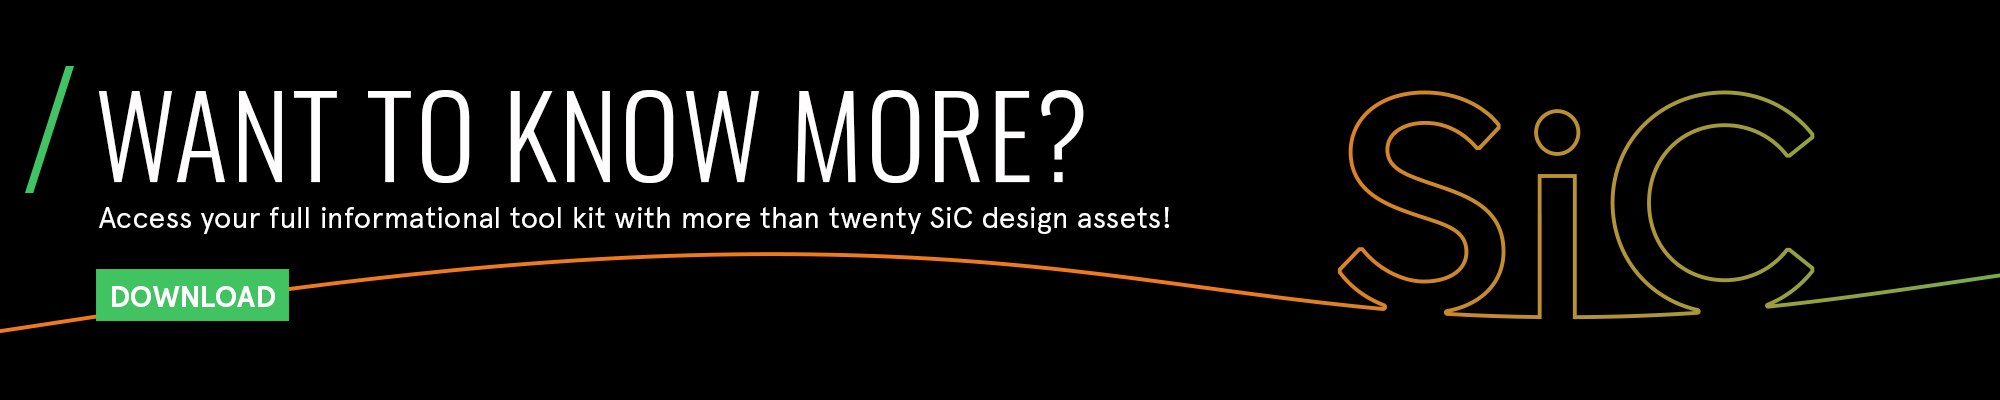 Access your full informational toolkit with more than 20 SiC design assets!